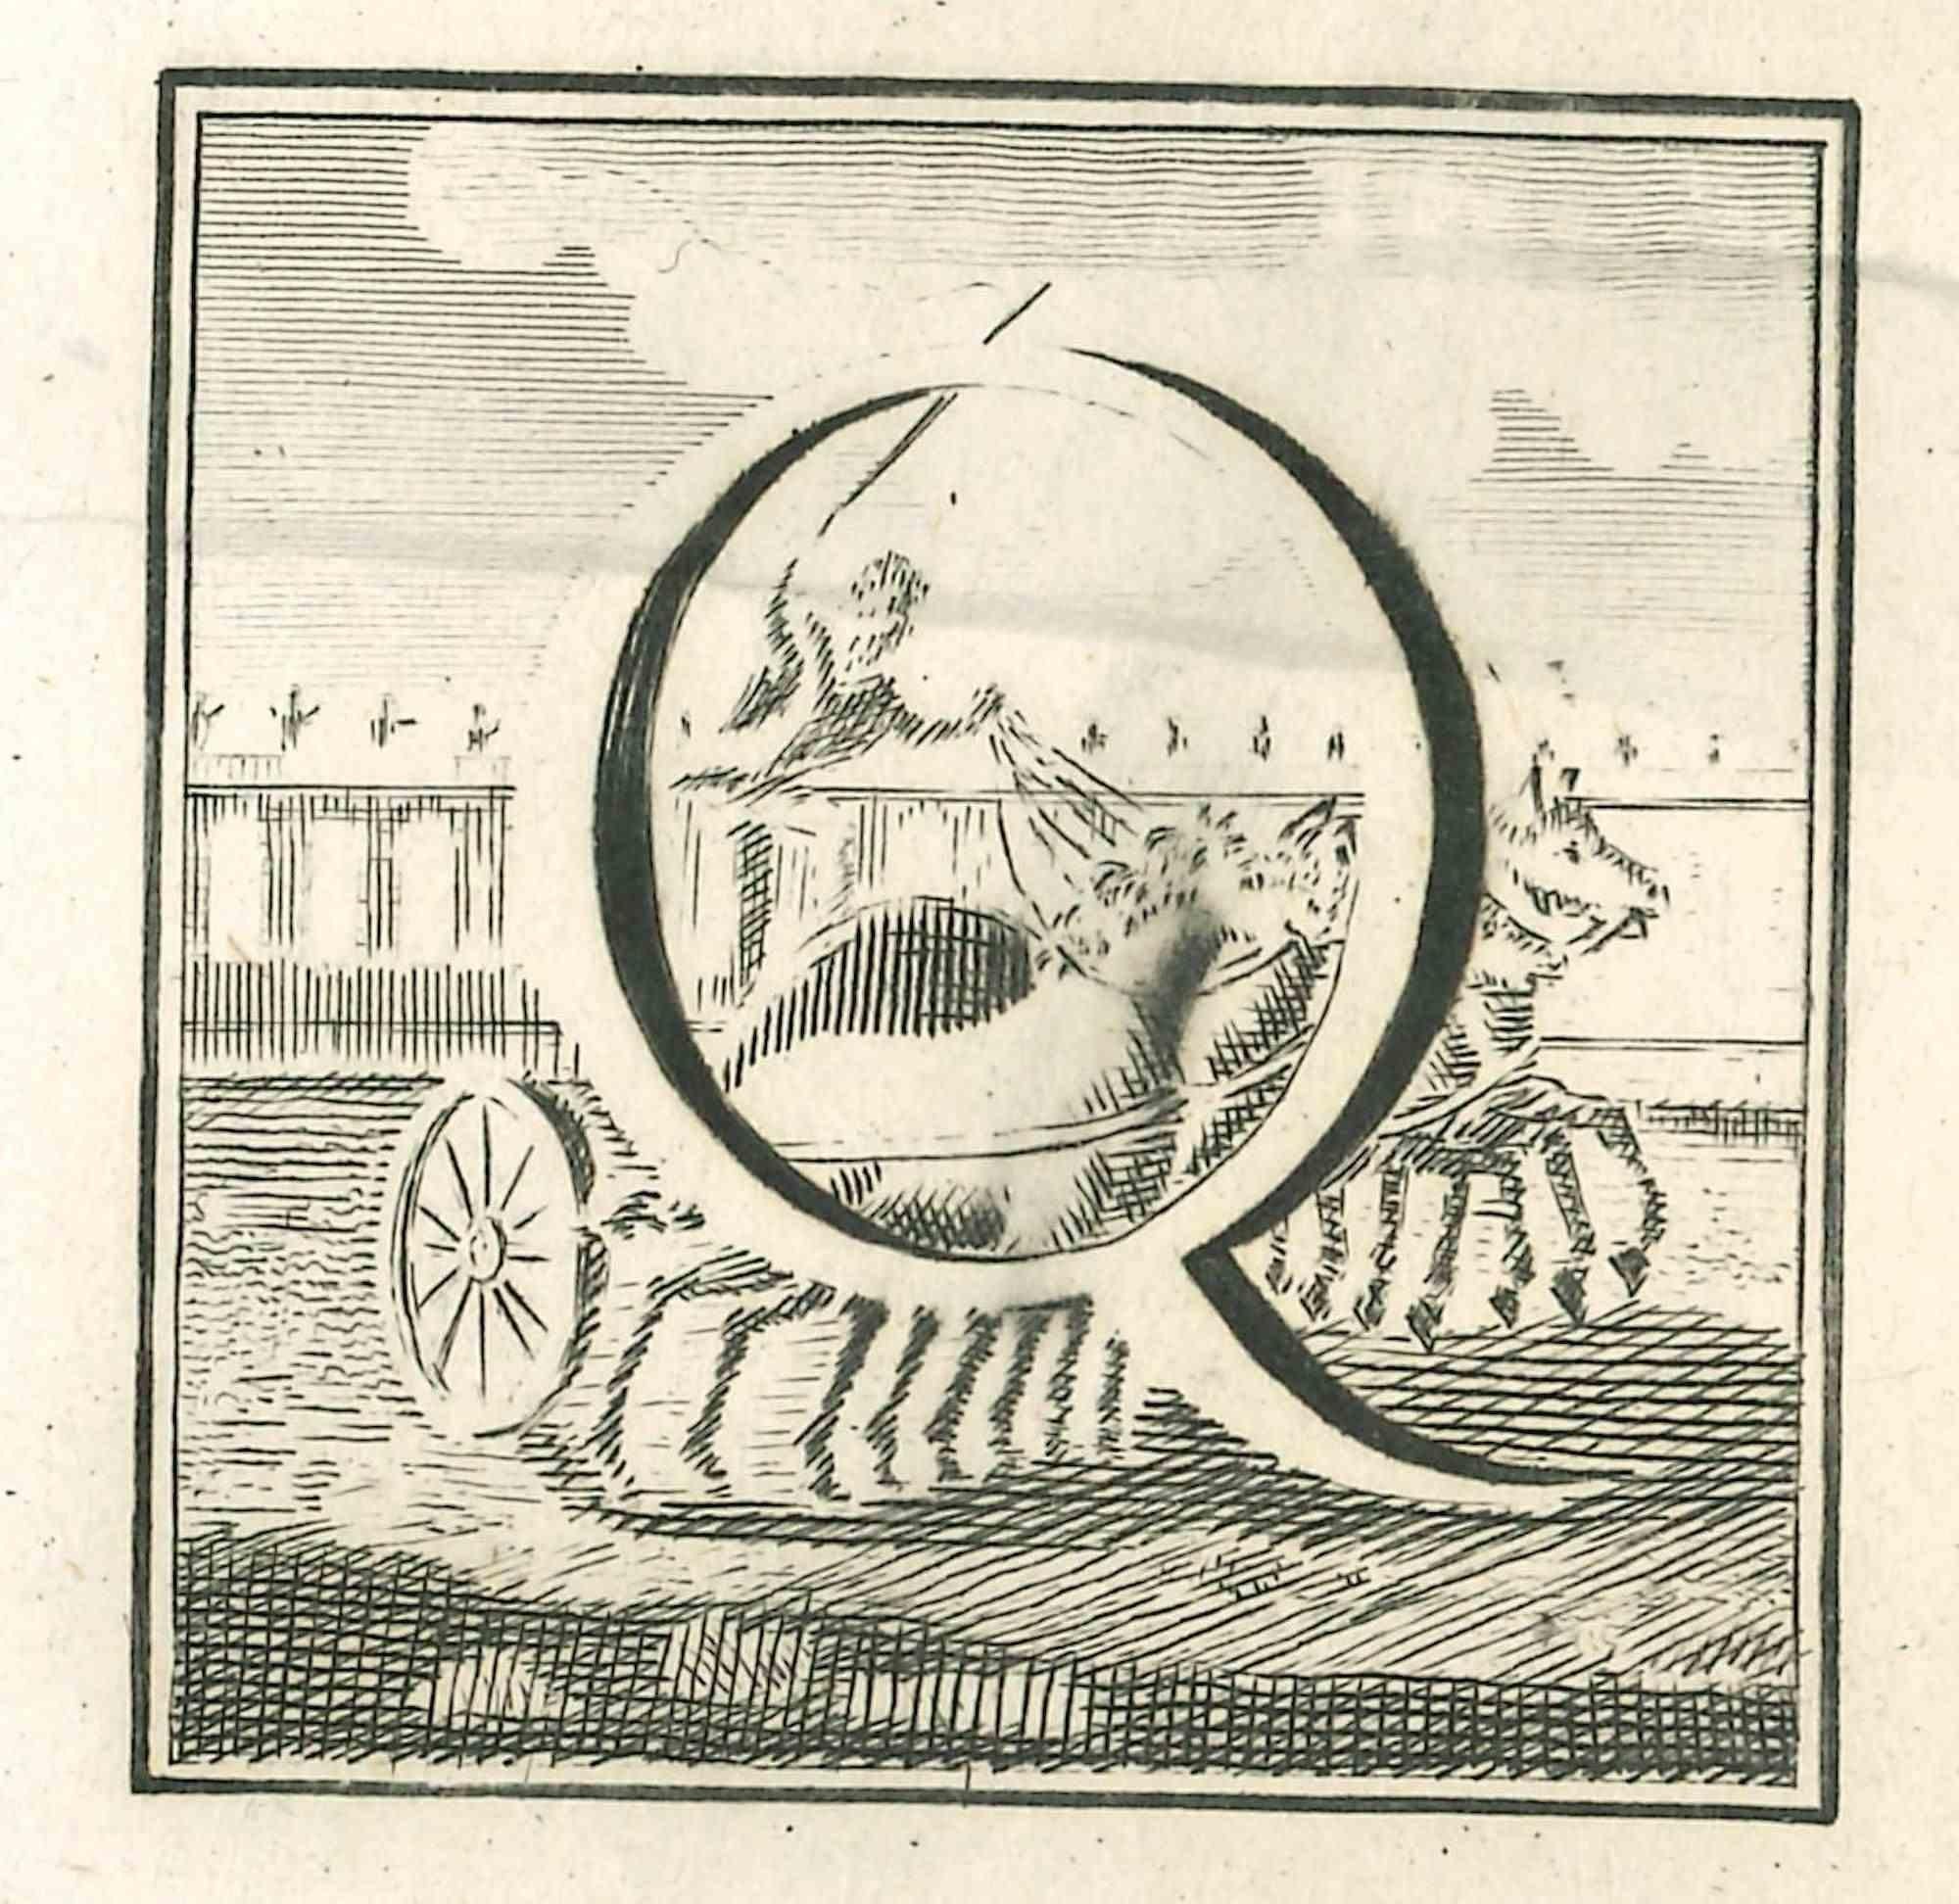 Letter of the Alphabet Q,  from the series "Antiquities of Herculaneum", is an etching on paper realized by Luigi Vanvitelli in the 18th century.

Good conditions with some folding.

The etching belongs to the print suite “Antiquities of Herculaneum